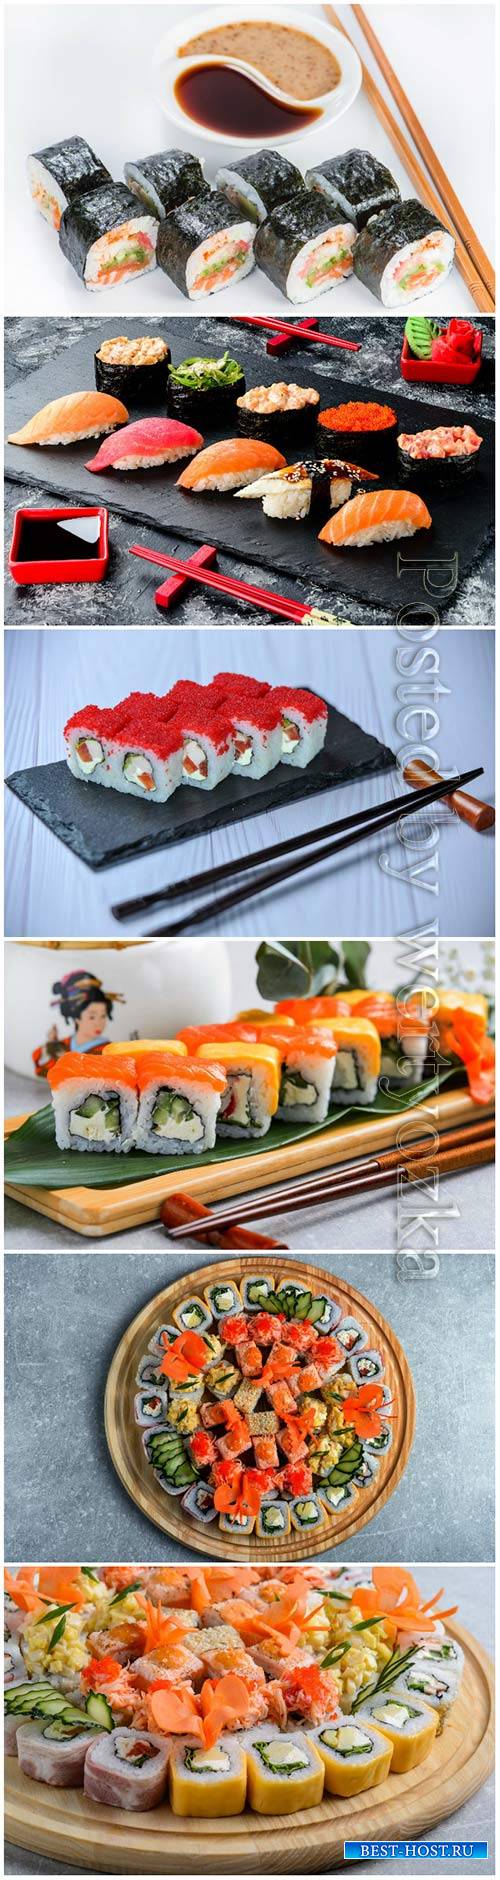 Sushi sets, delicious food